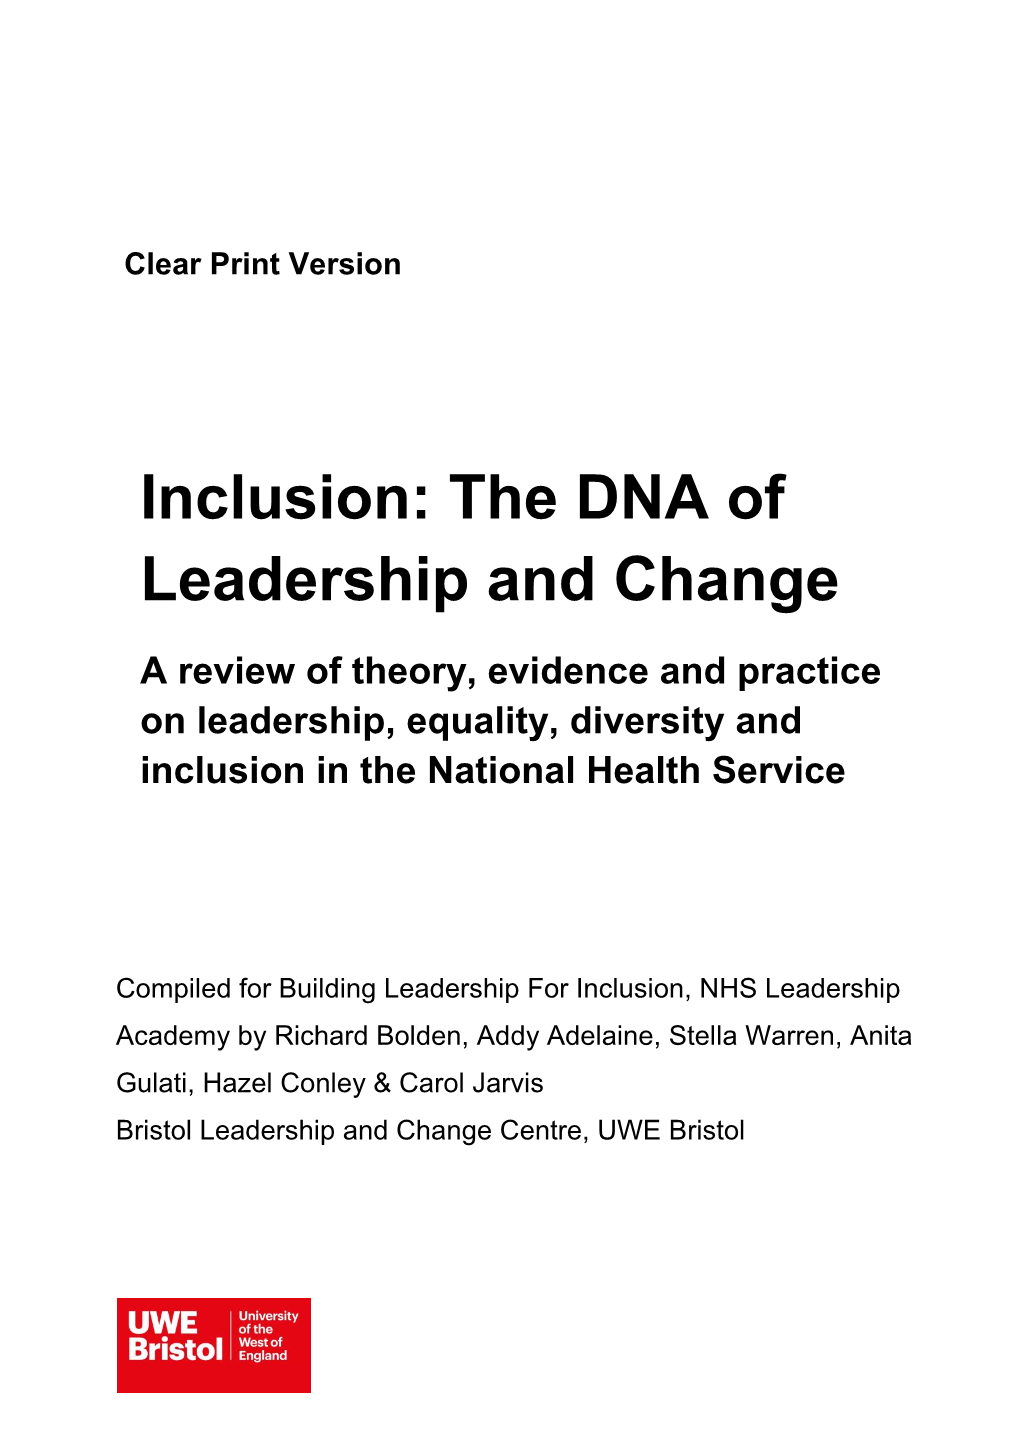 Inclusion: the DNA of Leadership and Change